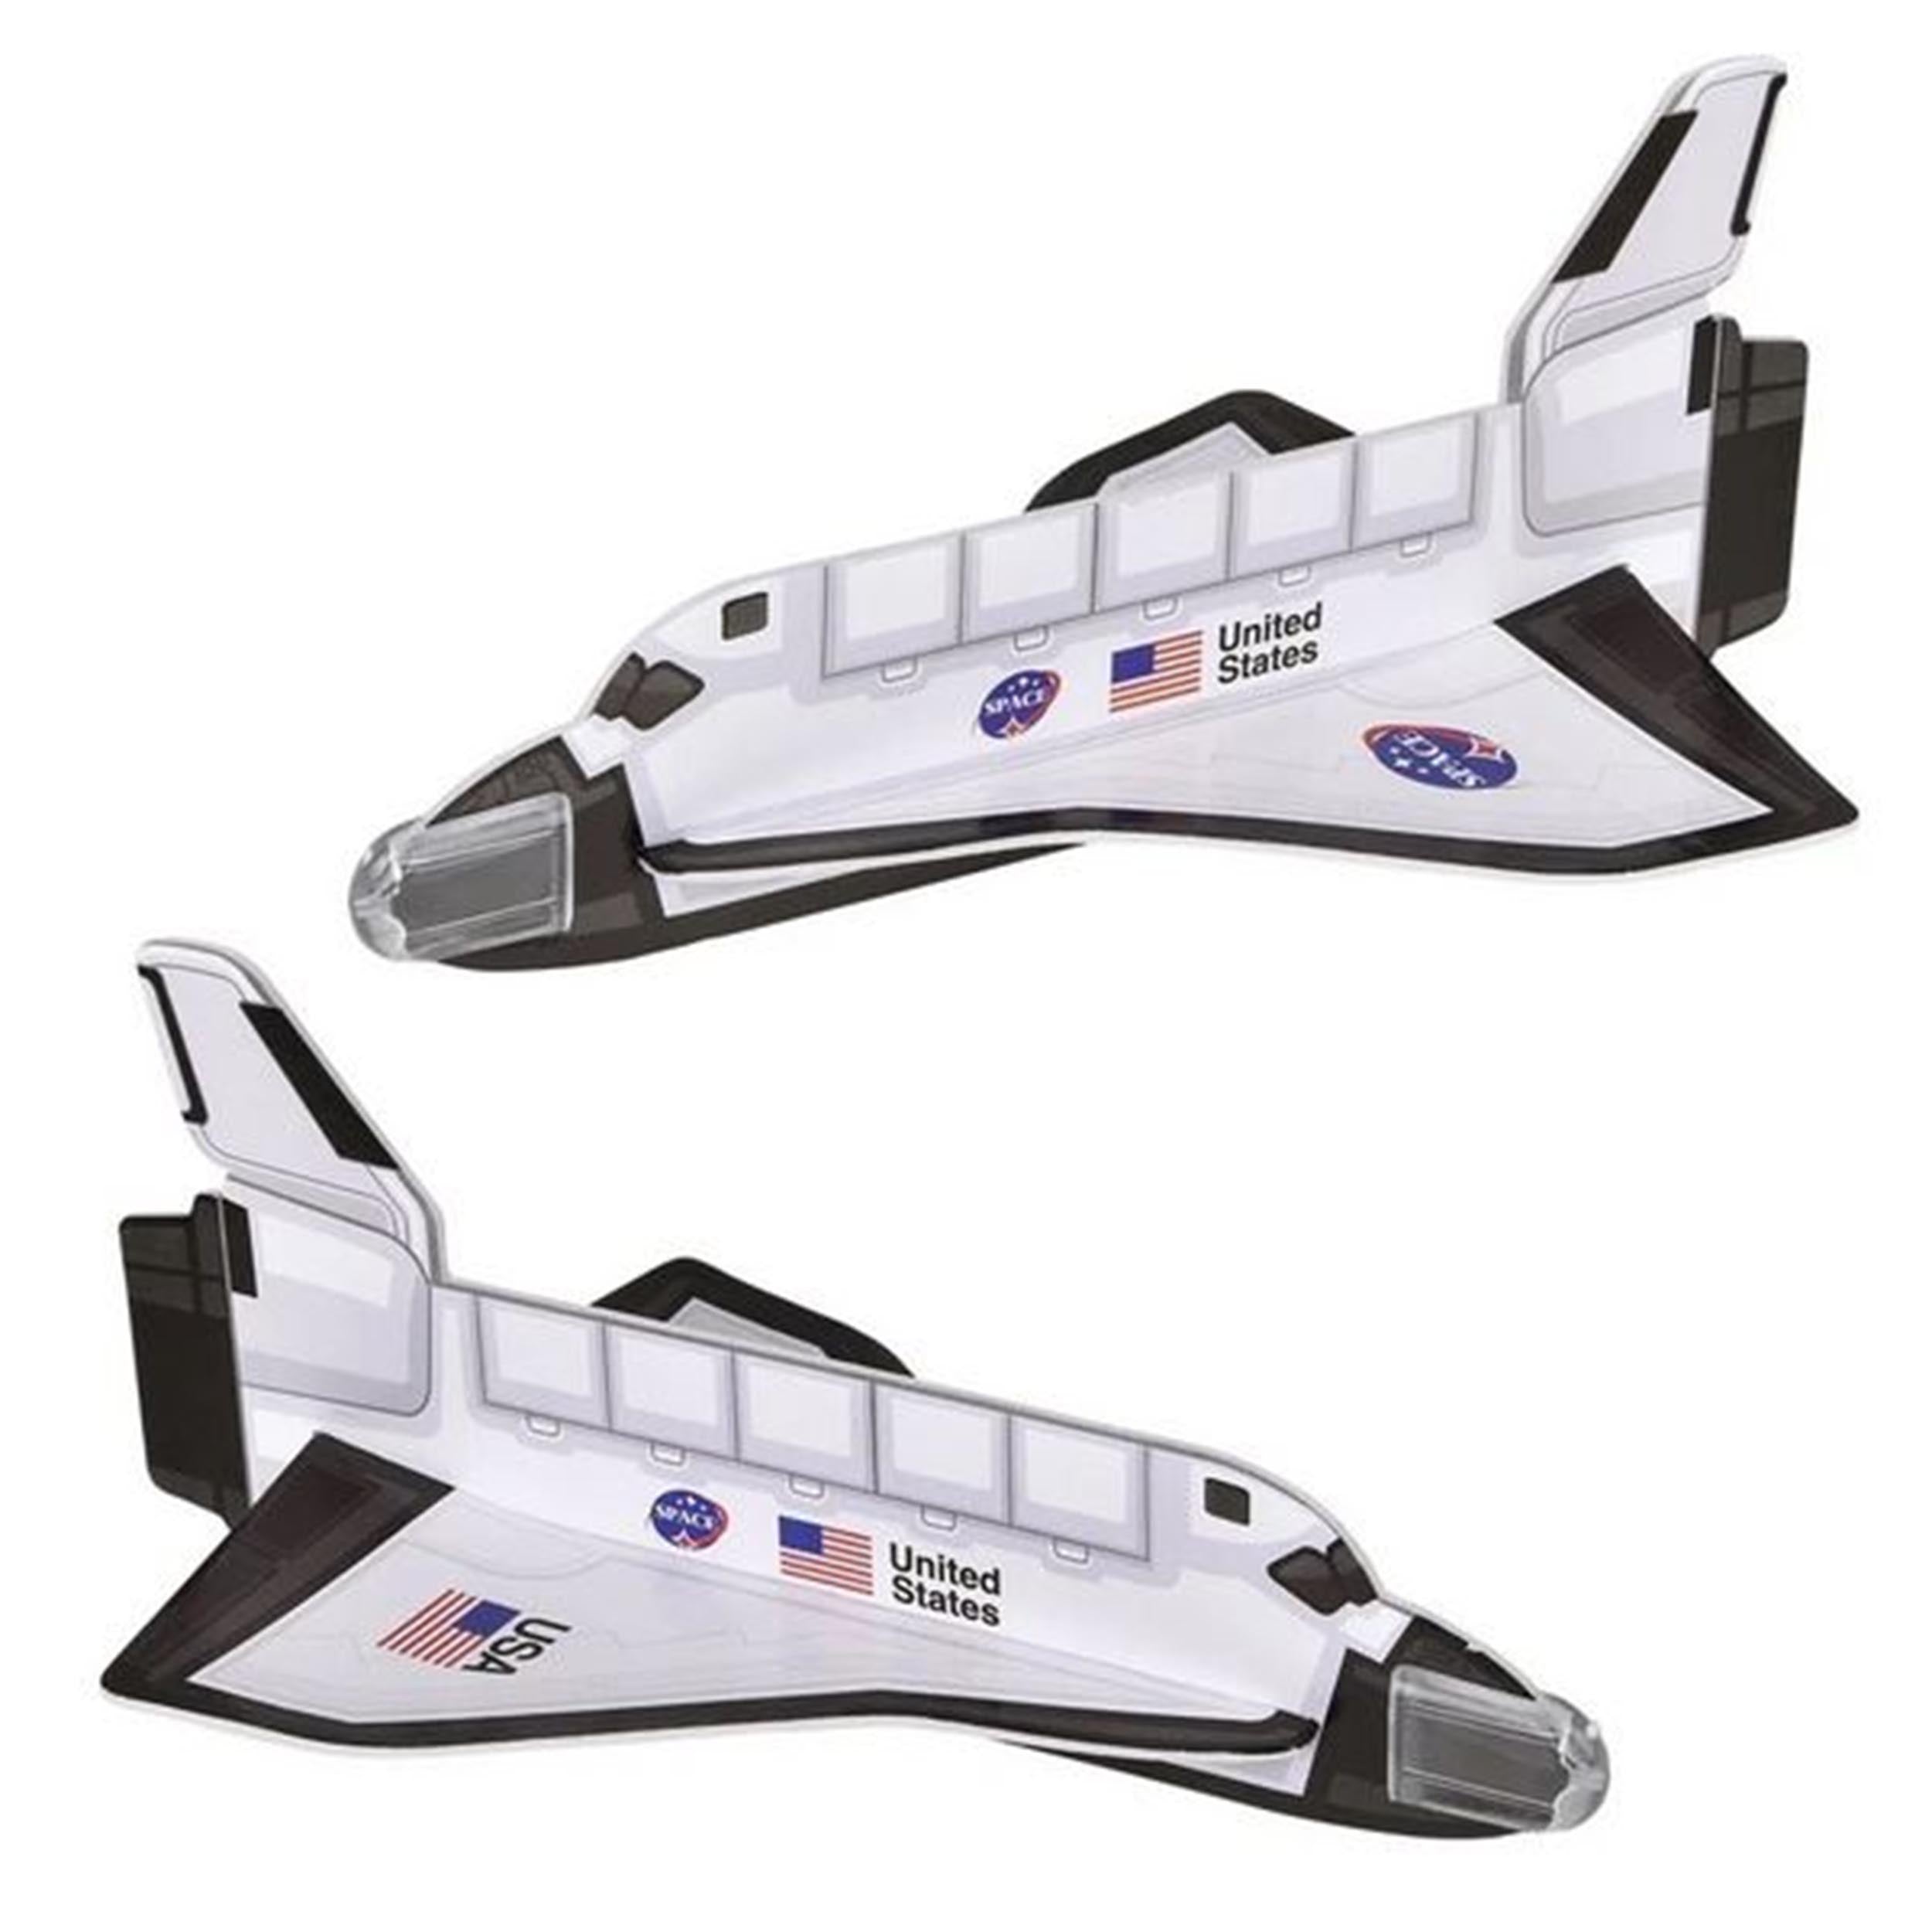 Space Shuttle Gliders ( 24 pieces=$19.99)